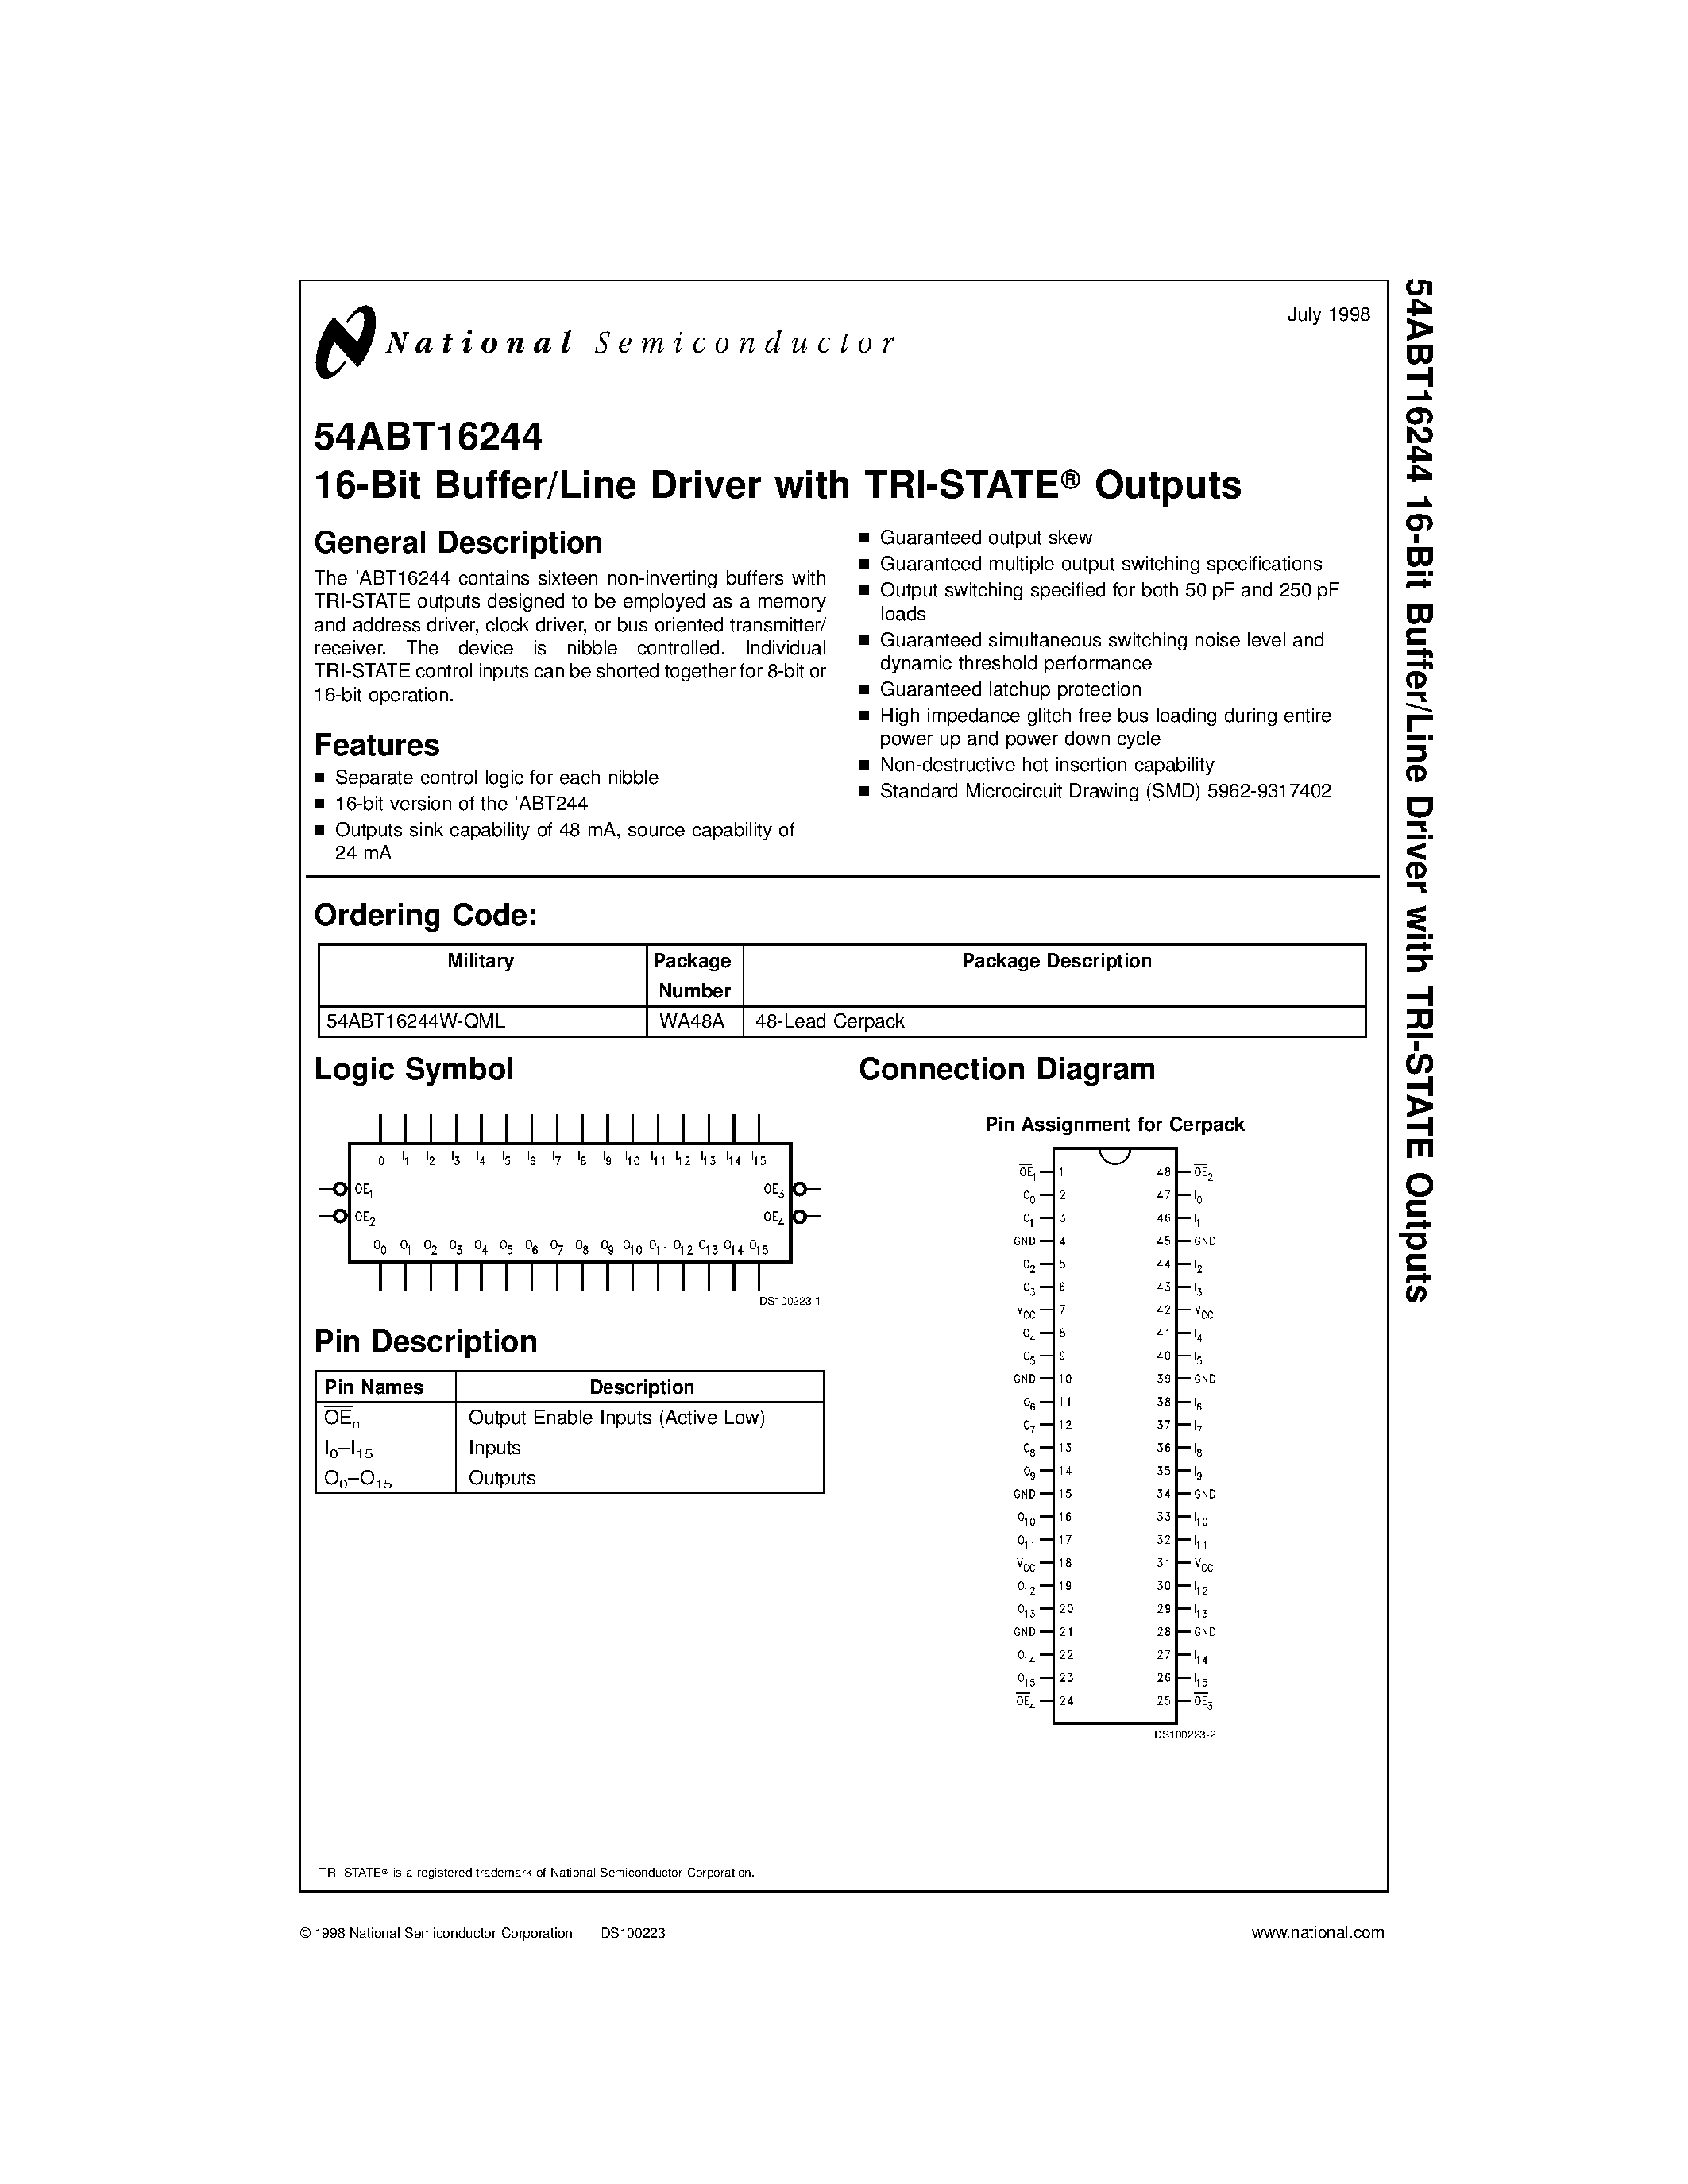 Datasheet 54ABT16244 - 16-Bit Buffer/Line Driver with TRI-STATE Outputs page 1